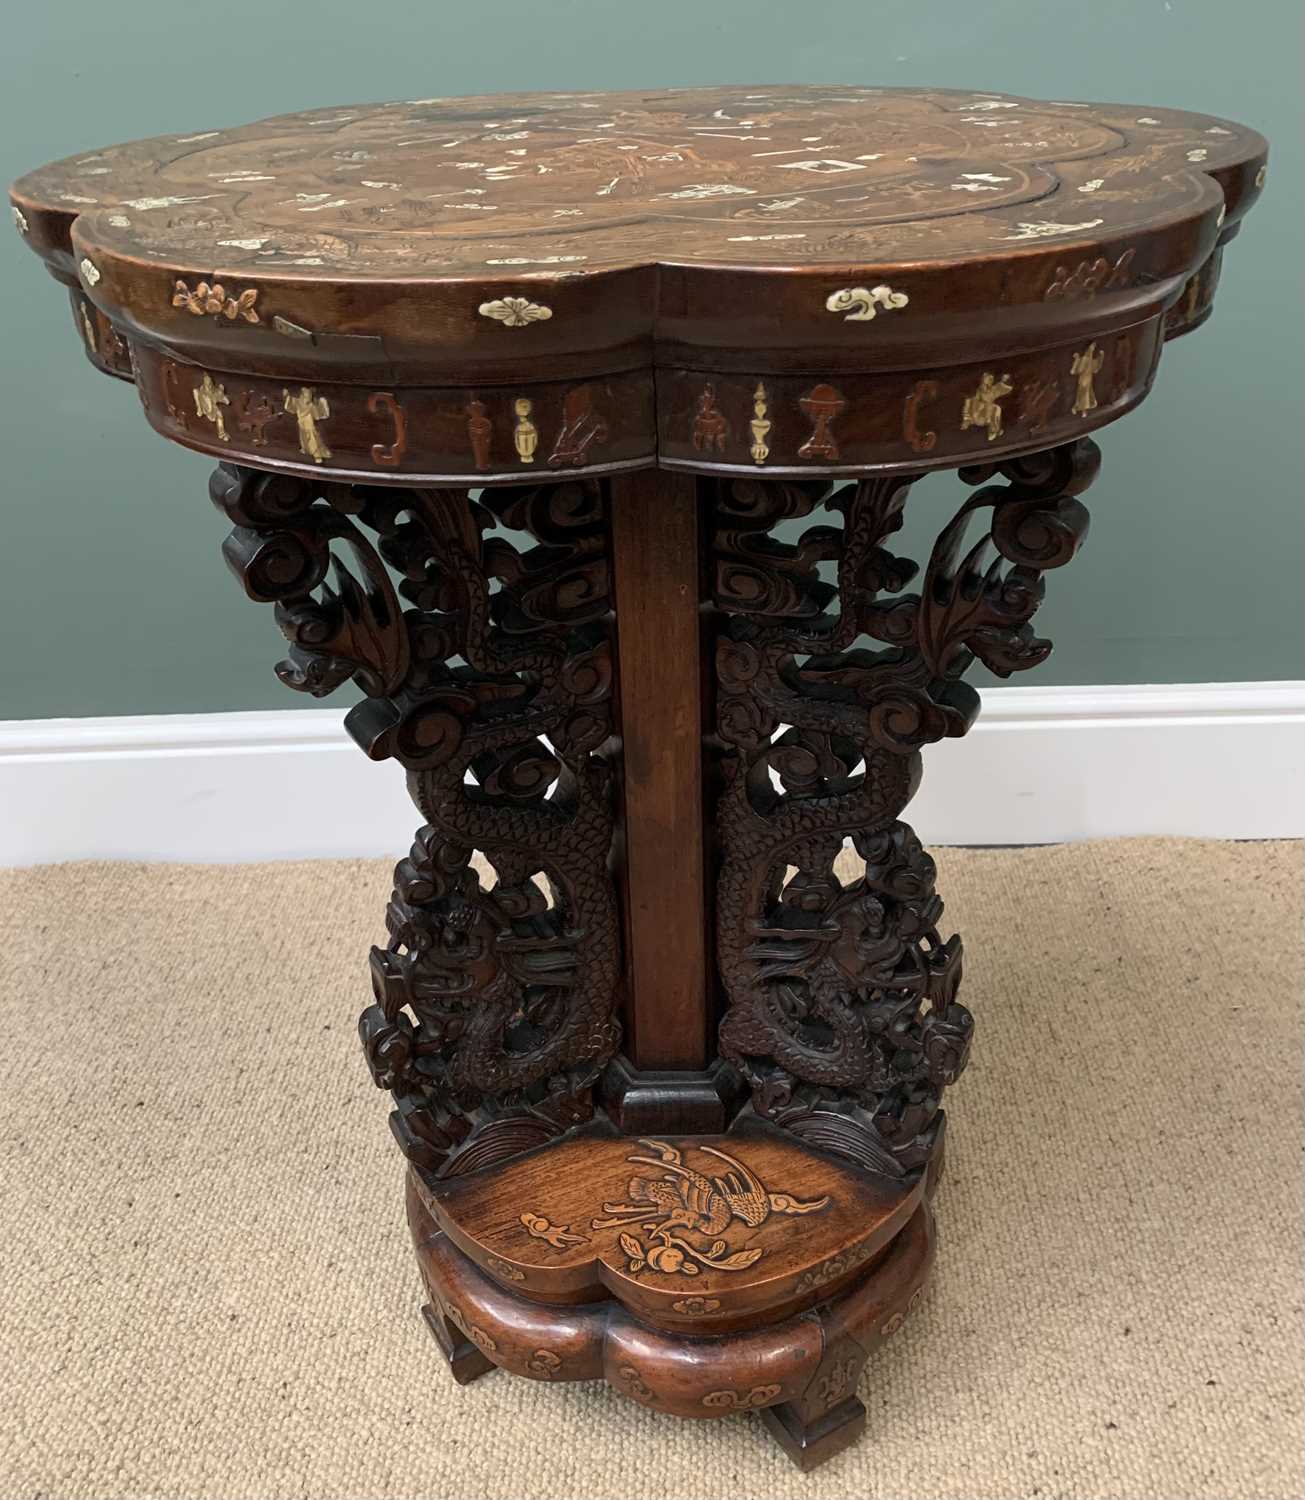 LOT WITHDRAWN - CHINESE CARVED HARDWOOD OCCASIONAL TABLE with fine inlay and carved detail having